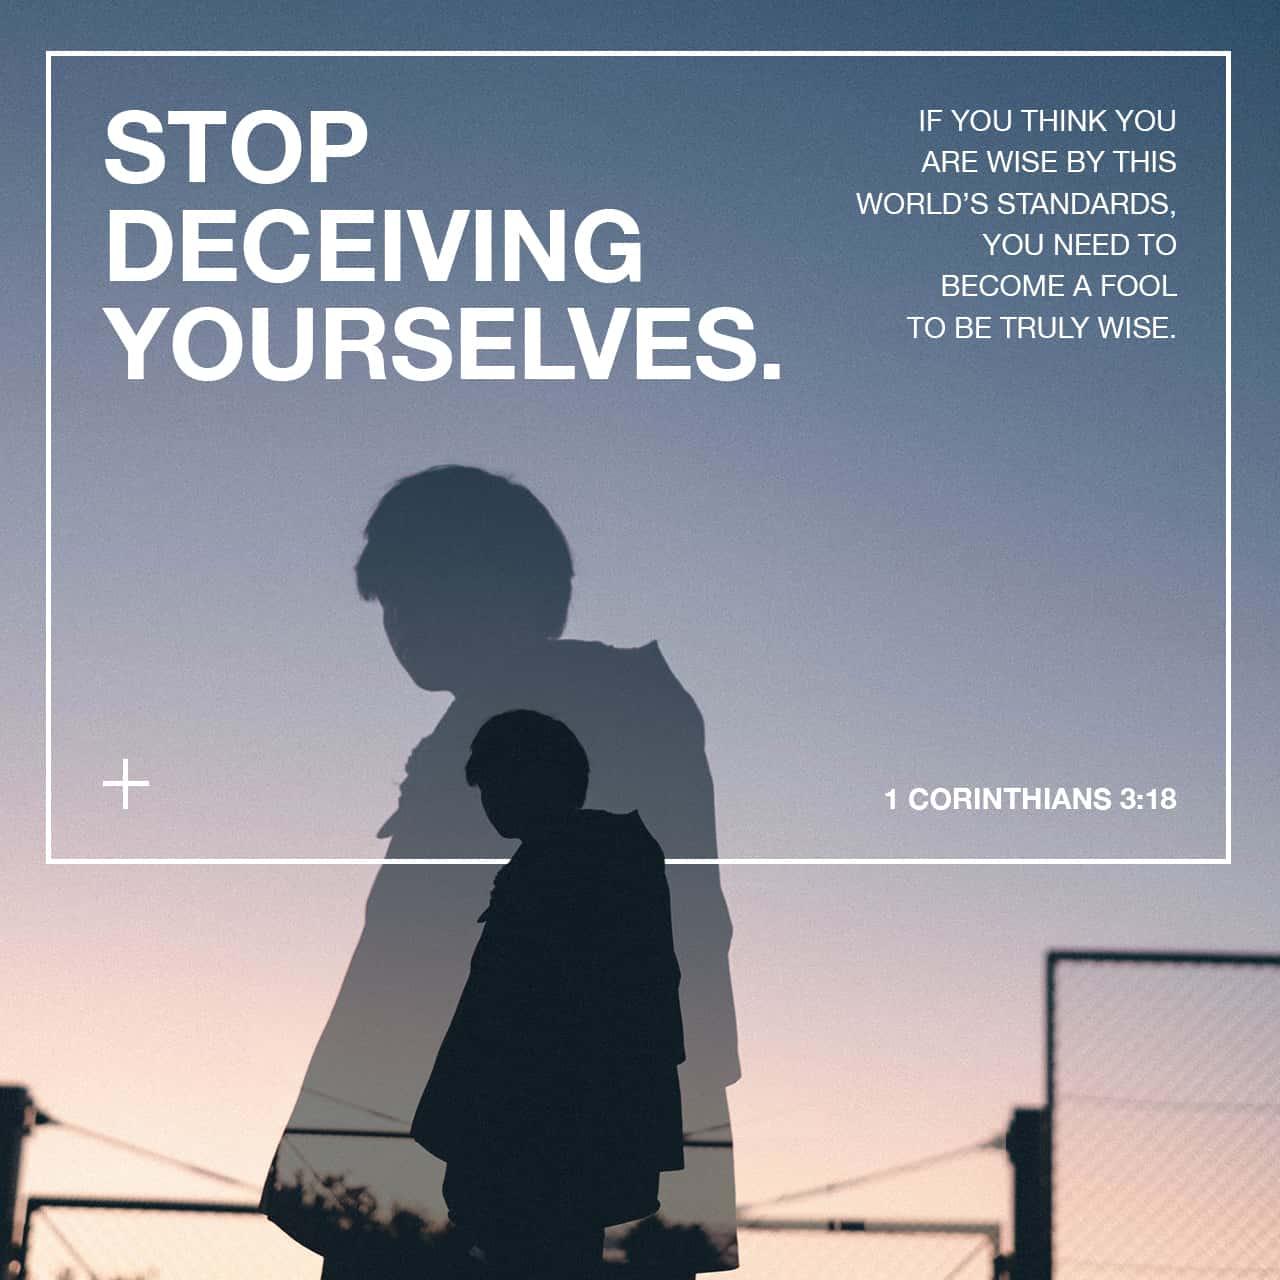 Bible Verse of the Day - day 81 - image 51163 (1 Corinthians 3:18)